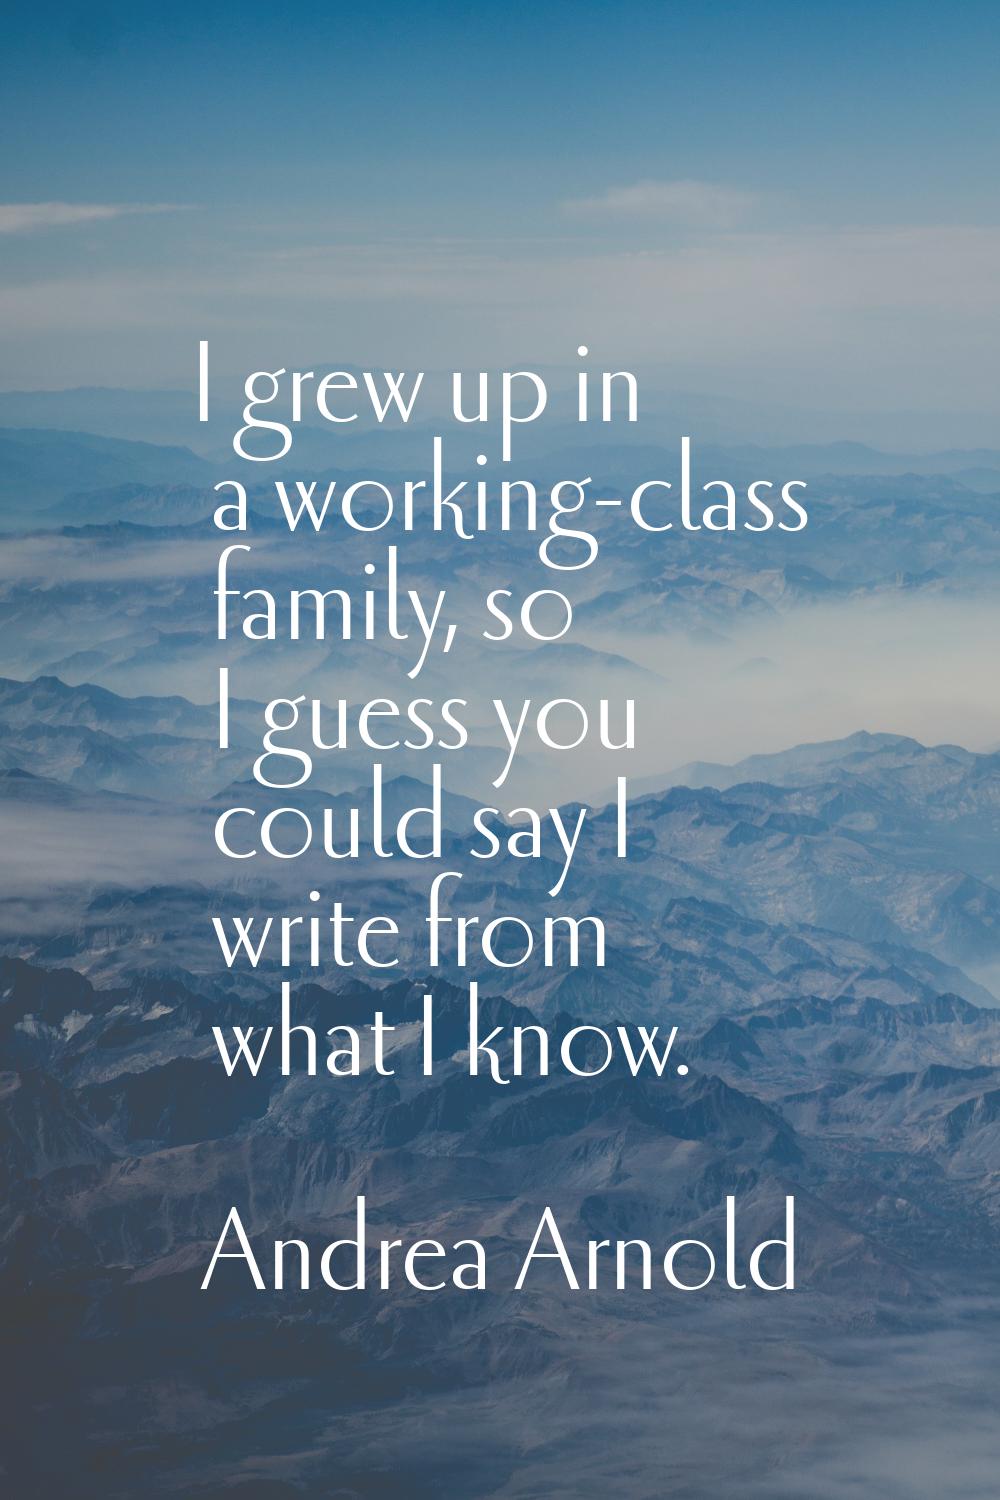 I grew up in a working-class family, so I guess you could say I write from what I know.